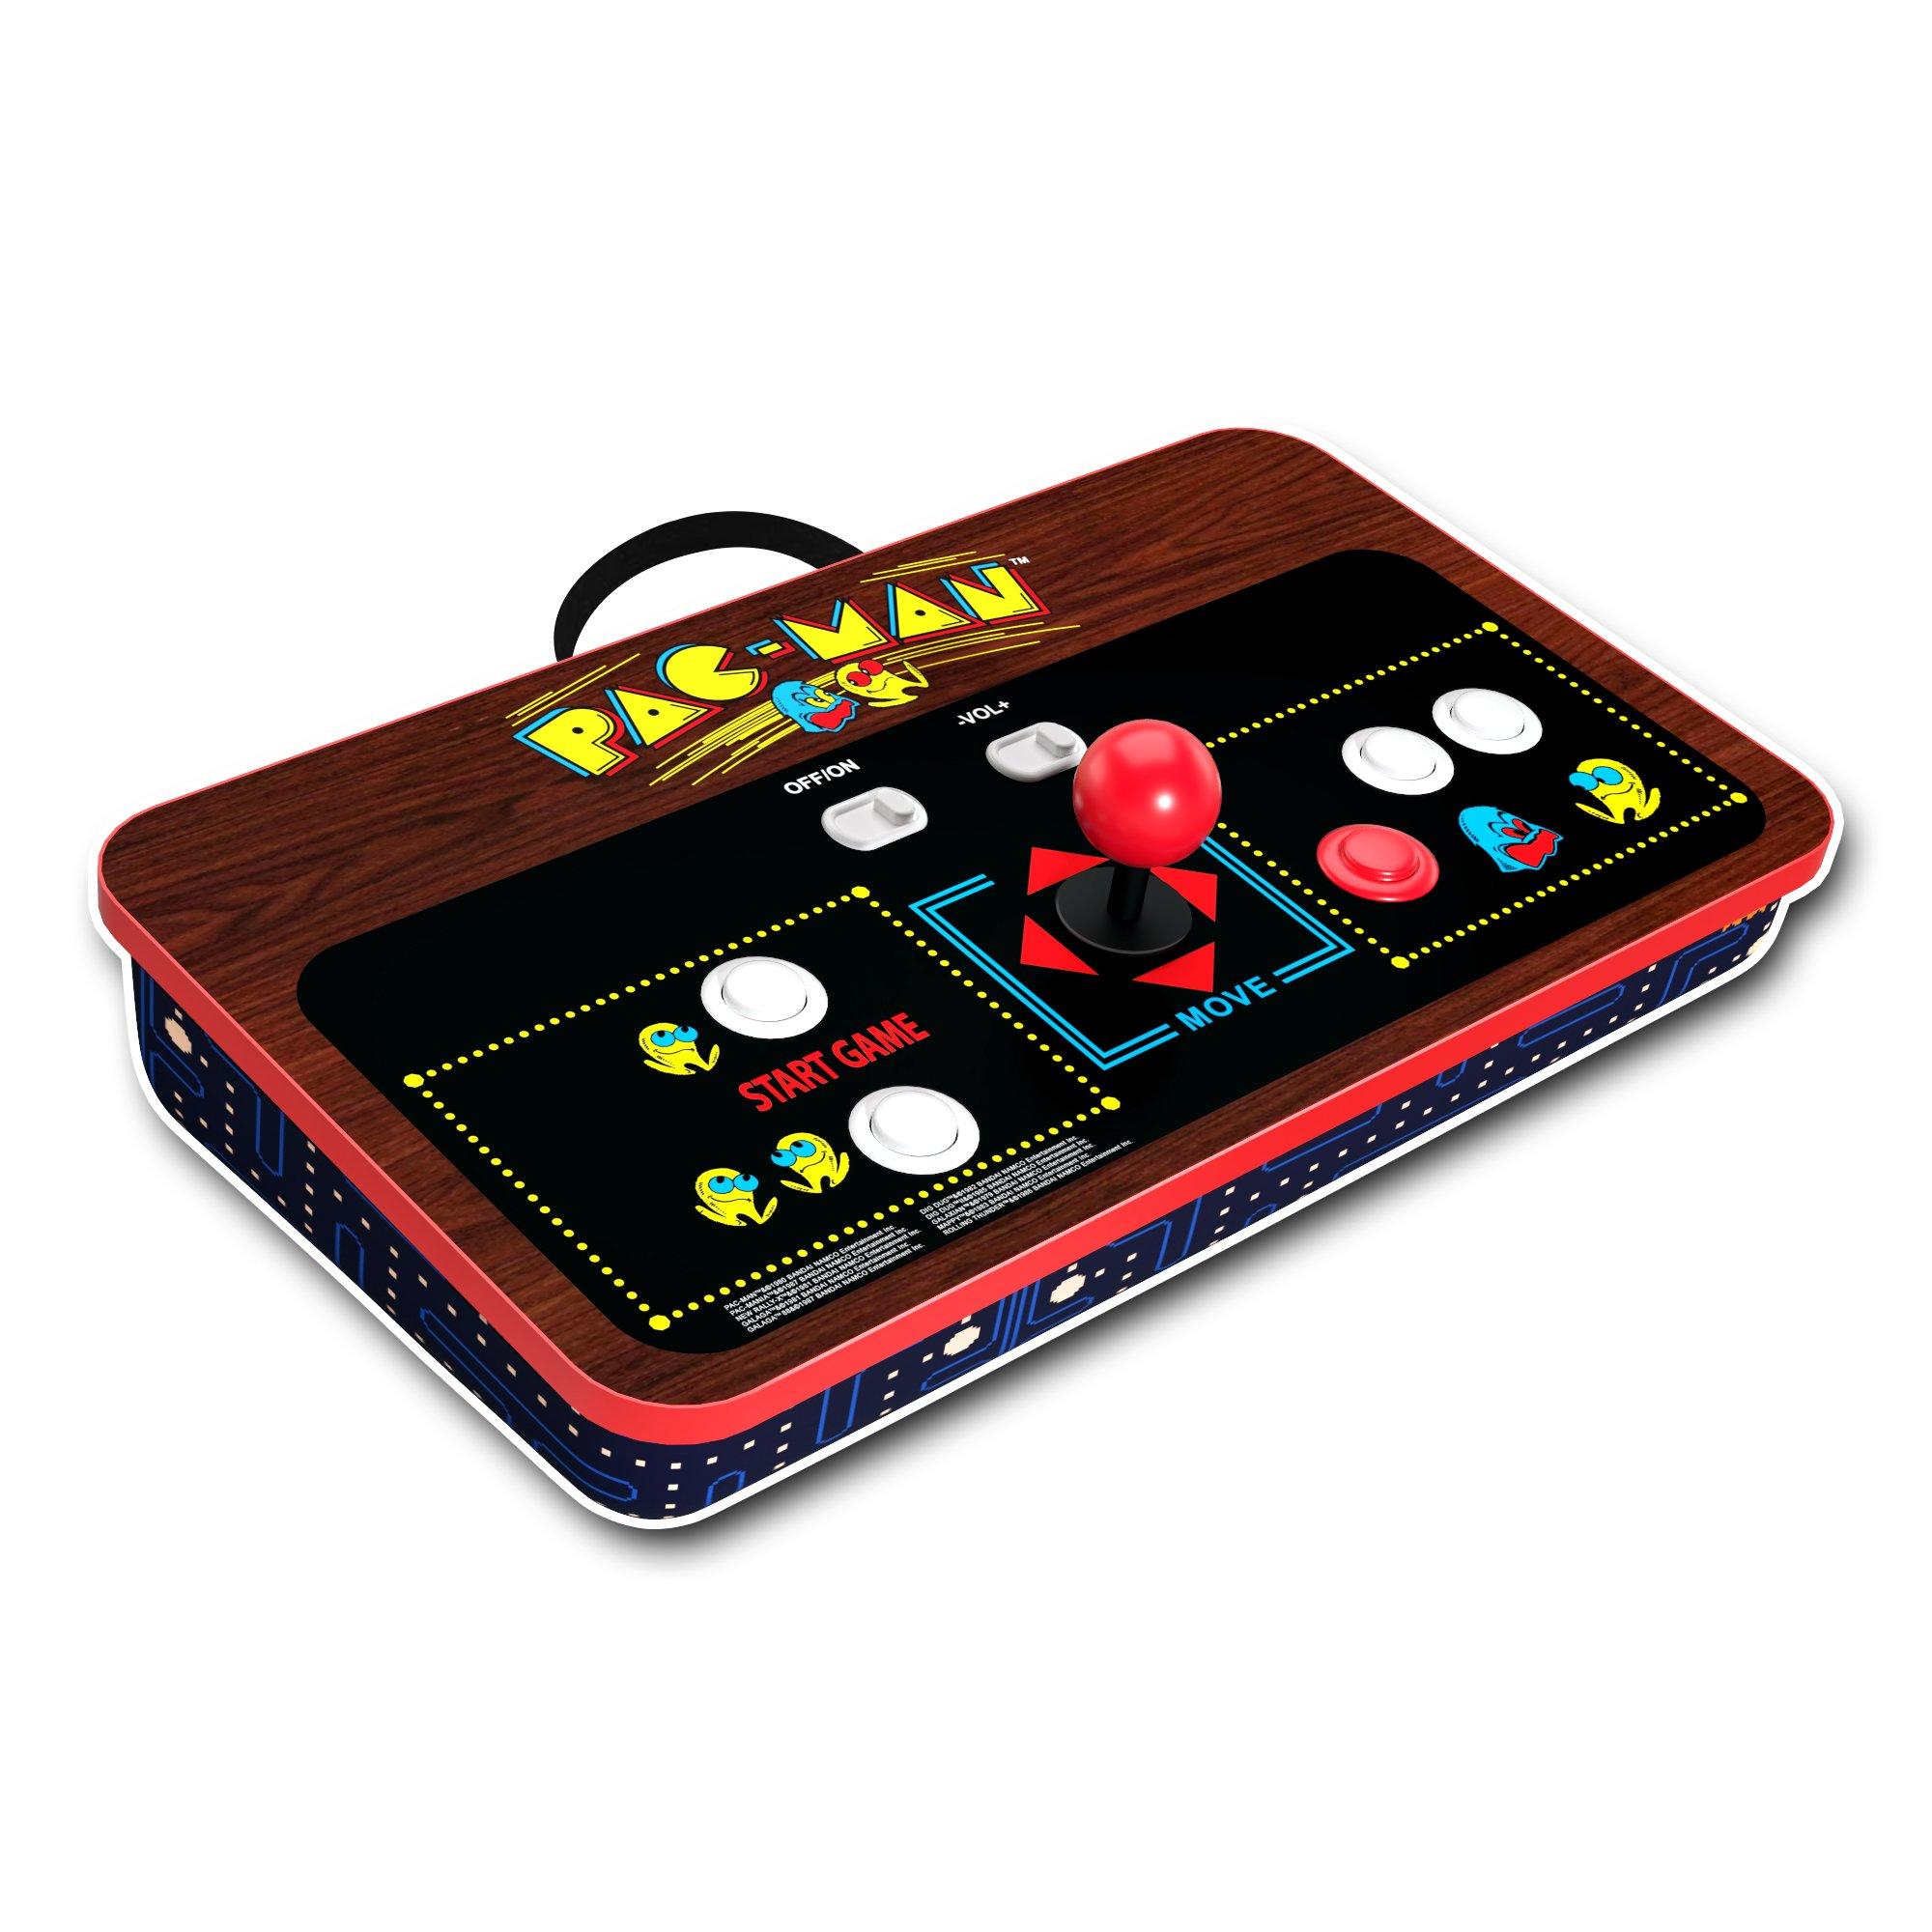 with　Couchcade　Controller　Arcade1UP　Game　Console　PAC-MAN　Micro　GameStop